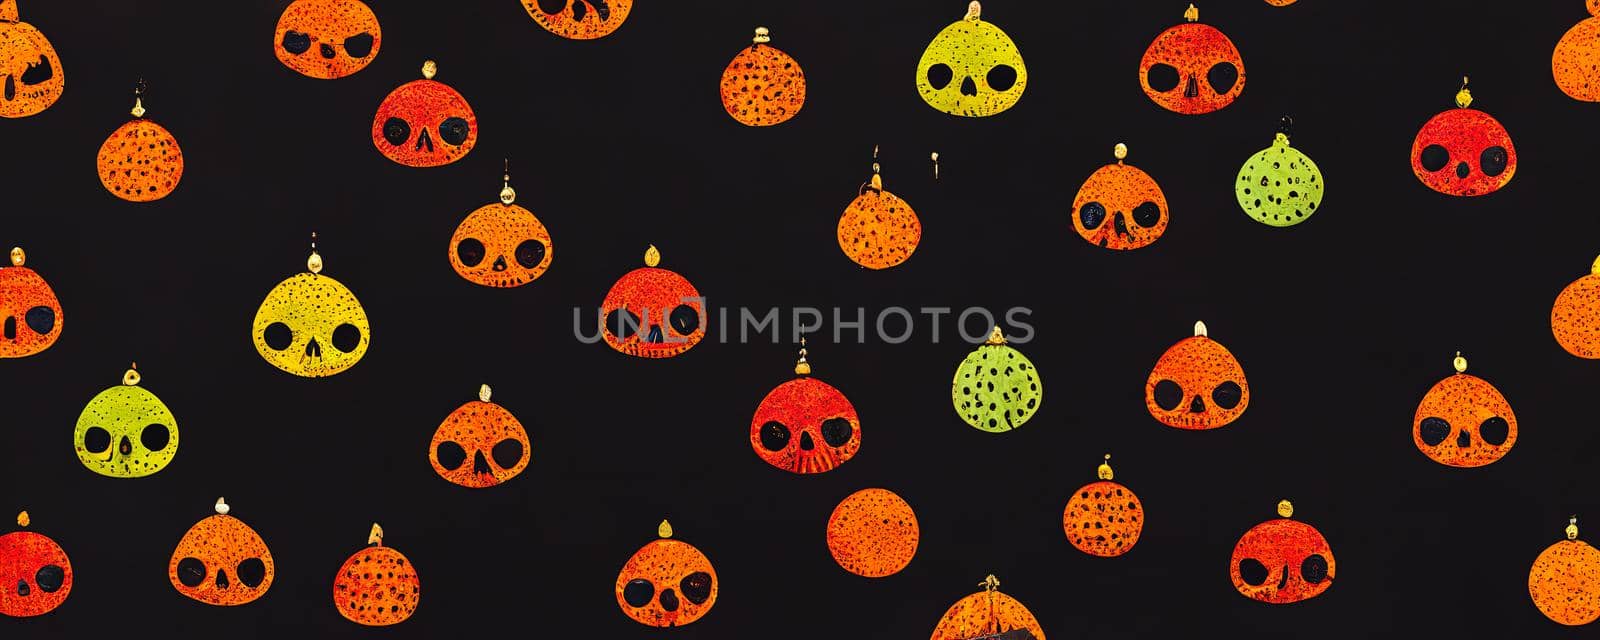 abstract drawing in the style of Halloween with pumpkins on a black background.